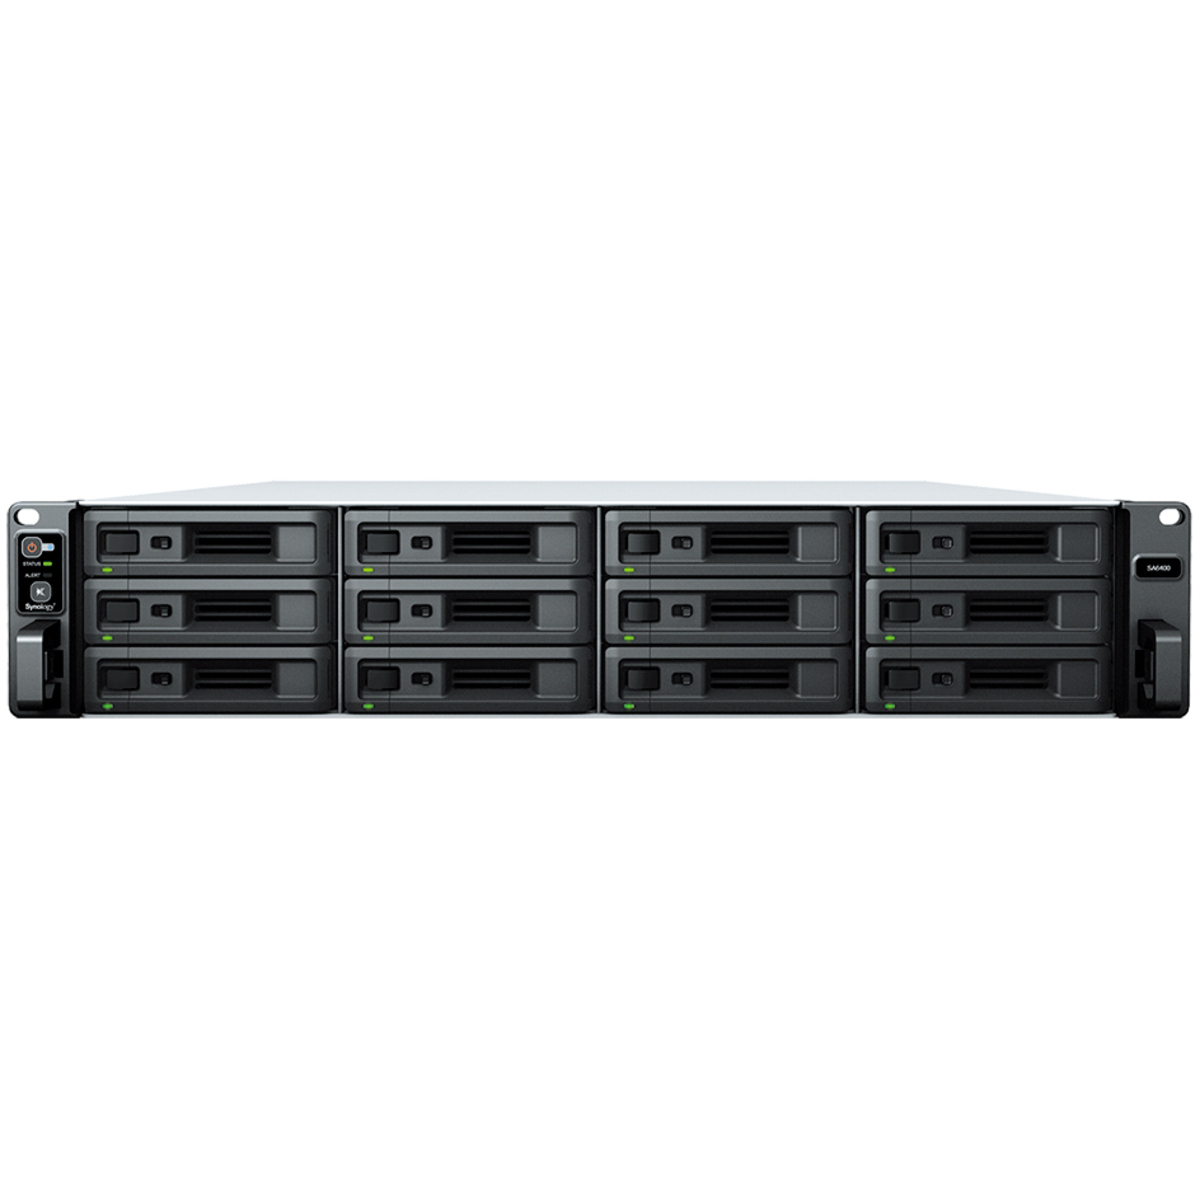 Synology RackStation SA6400 220tb 12-Bay RackMount Large Business / Enterprise NAS - Network Attached Storage Device 10x22tb Seagate EXOS X22 ST22000NM001E 3.5 7200rpm SATA 6Gb/s HDD ENTERPRISE Class Drives Installed - Burn-In Tested RackStation SA6400